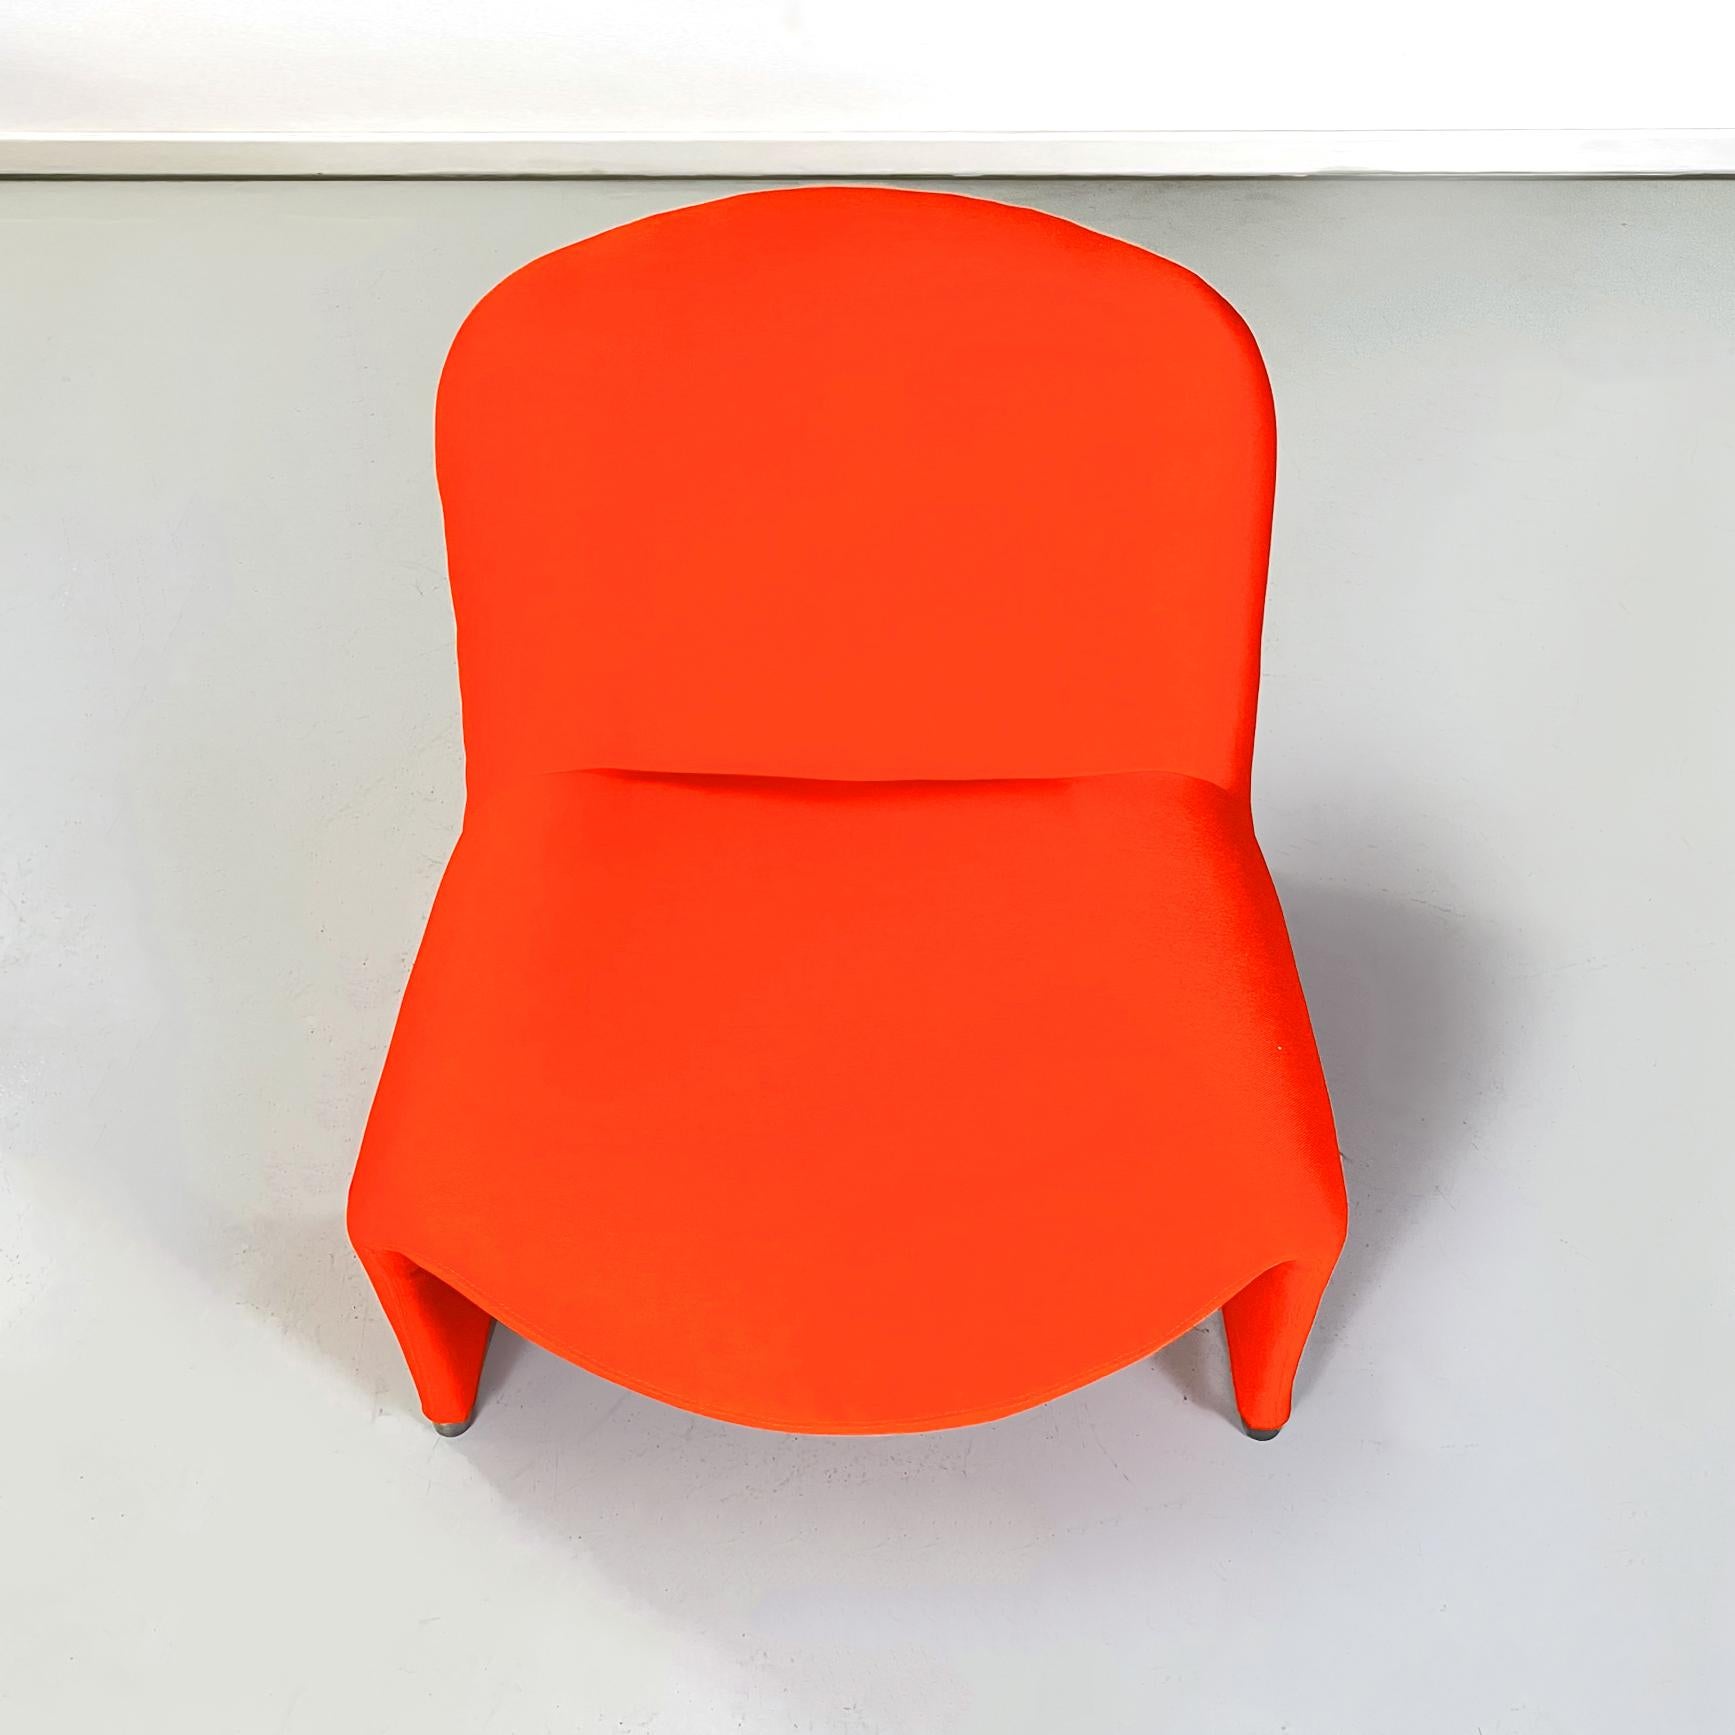 Italian Modern Red Chairs Alky by Giancarlo Piretti for Anonima Castelli, 1970s For Sale 1